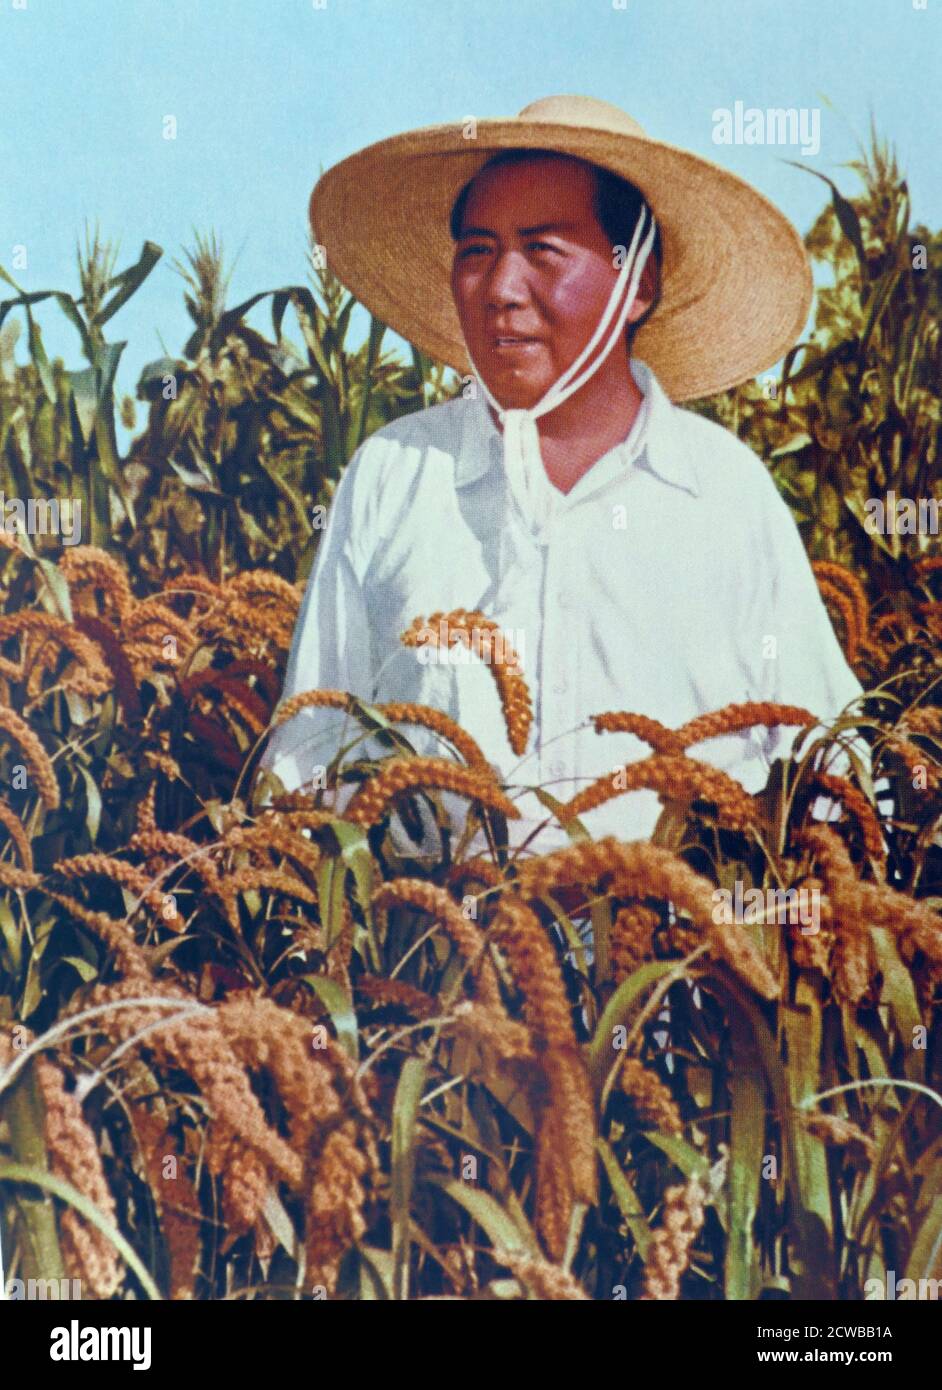 Chairman Mao inspecting a farm in rural Henan. (1958). The Great Leap Forward, was an economic and social campaign by the Communist Party of China (CPC) from 1958 to 1962. The campaign was led by Chairman Mao Zedong and aimed to rapidly transform the country from an agrarian economy into a socialist society through rapid industrialization and collectivization. Stock Photo